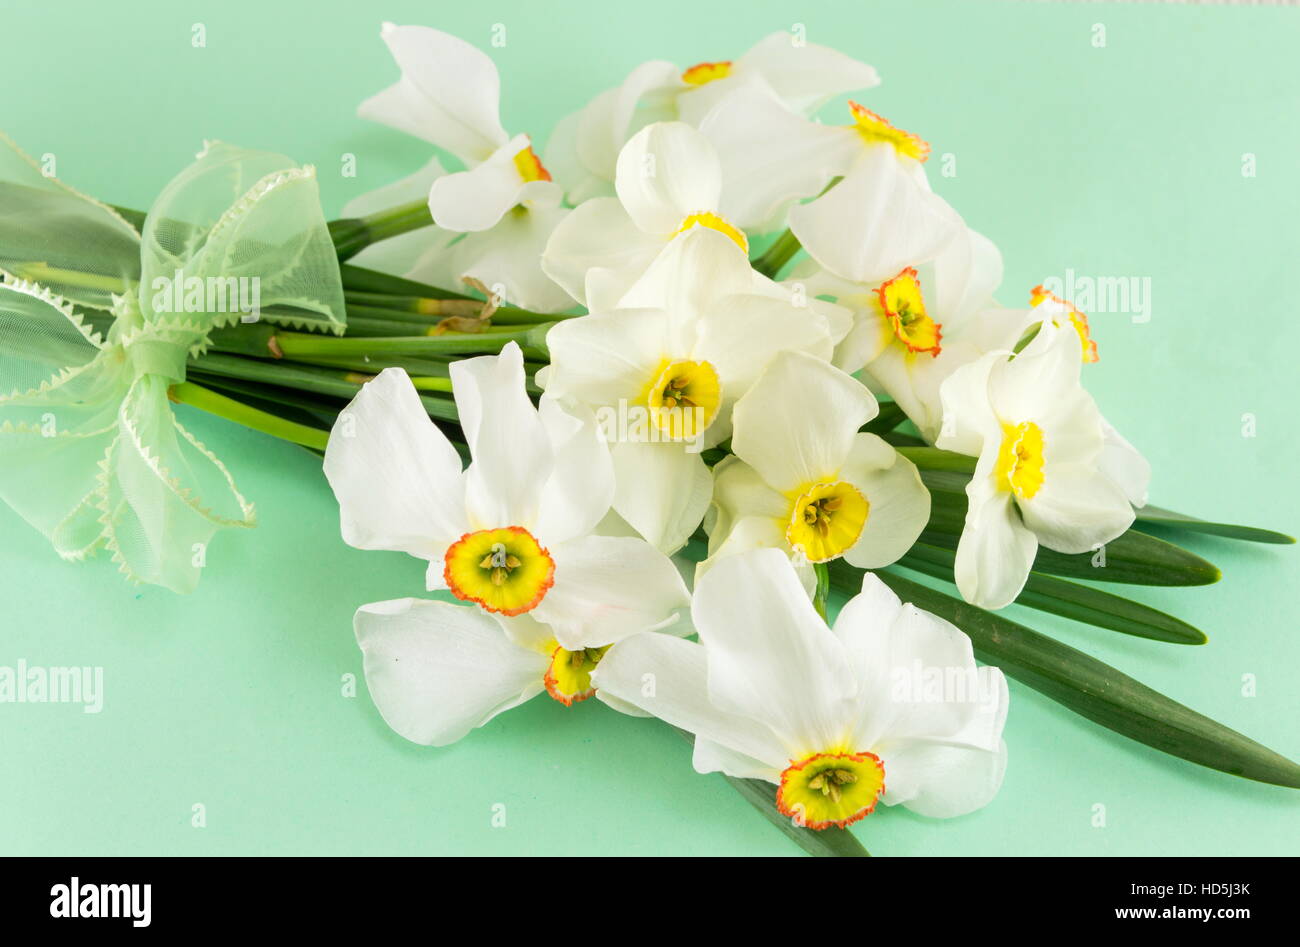 Narcissus flowers bouquet on green background. Spring time Stock Photo